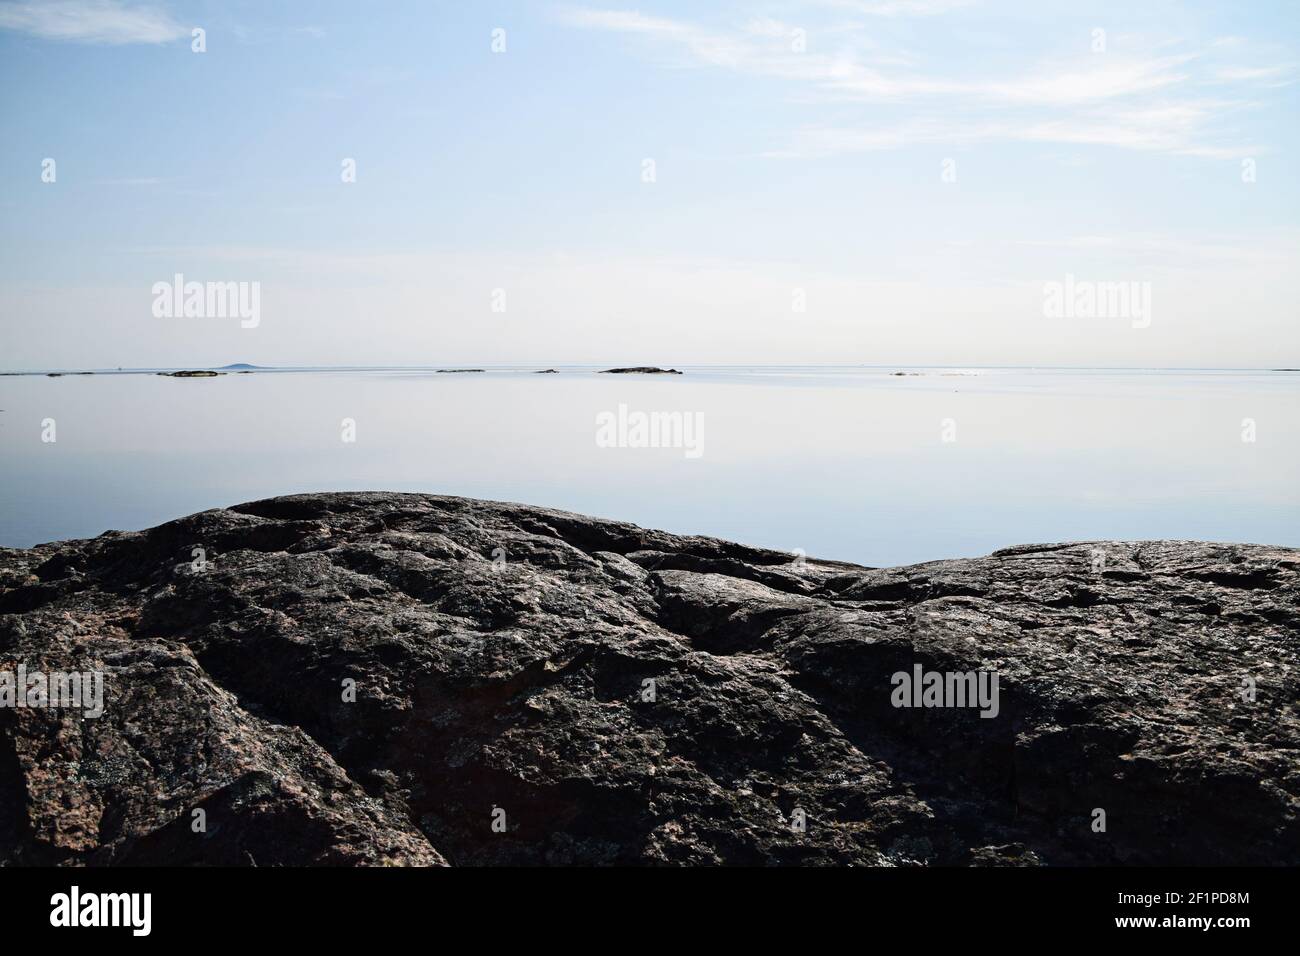 Calm water this sunny day in the archipelago. Focus on the foreground and the rock formation, typical for the Swedish archipelago nature. Stock Photo